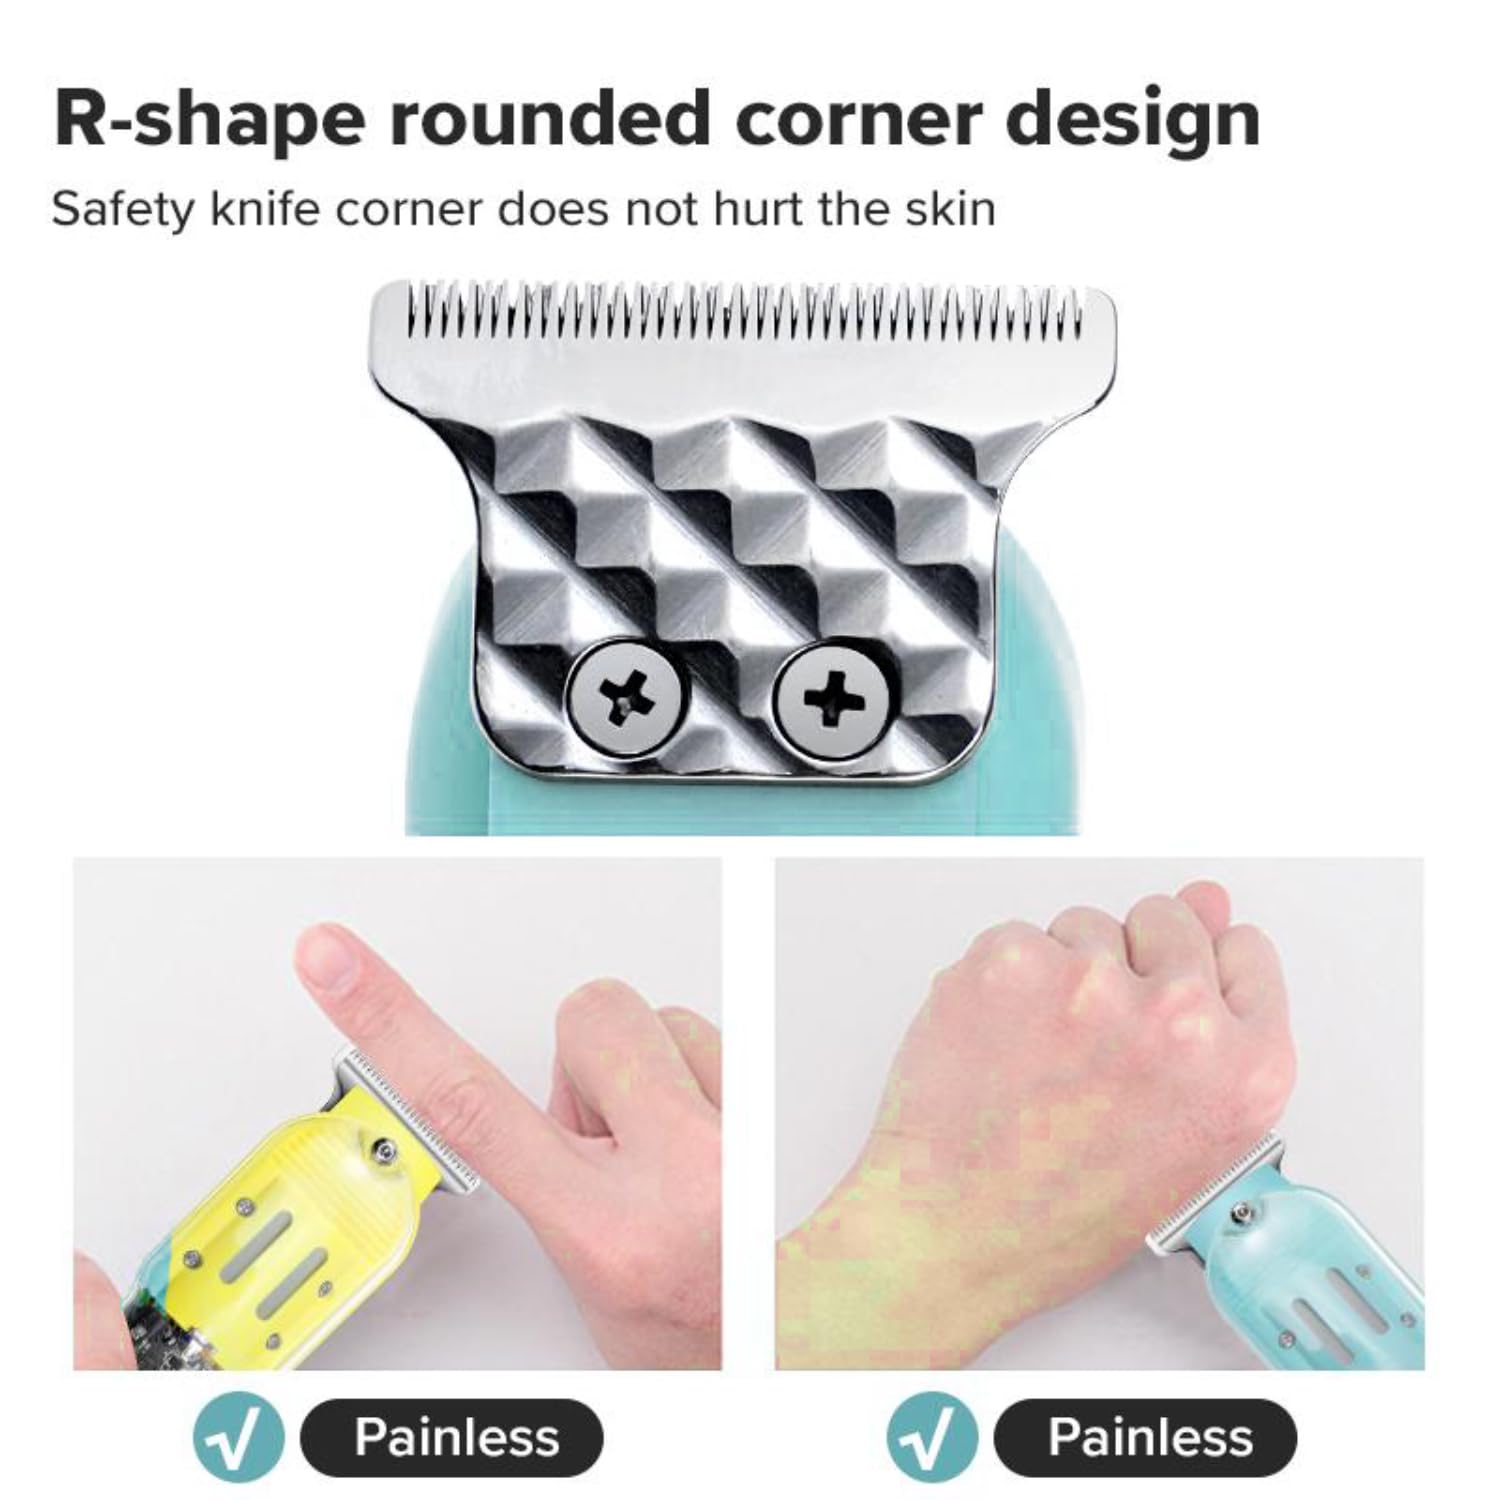 SkyShopy Pro Li Outliner Cordless T Blade Hair Clipper Professional 0 Gapped Outlining for Barbers 0mm balding Shape up Digital Display 3 guide comb Powerful Rotary Motor Runtime 180 min